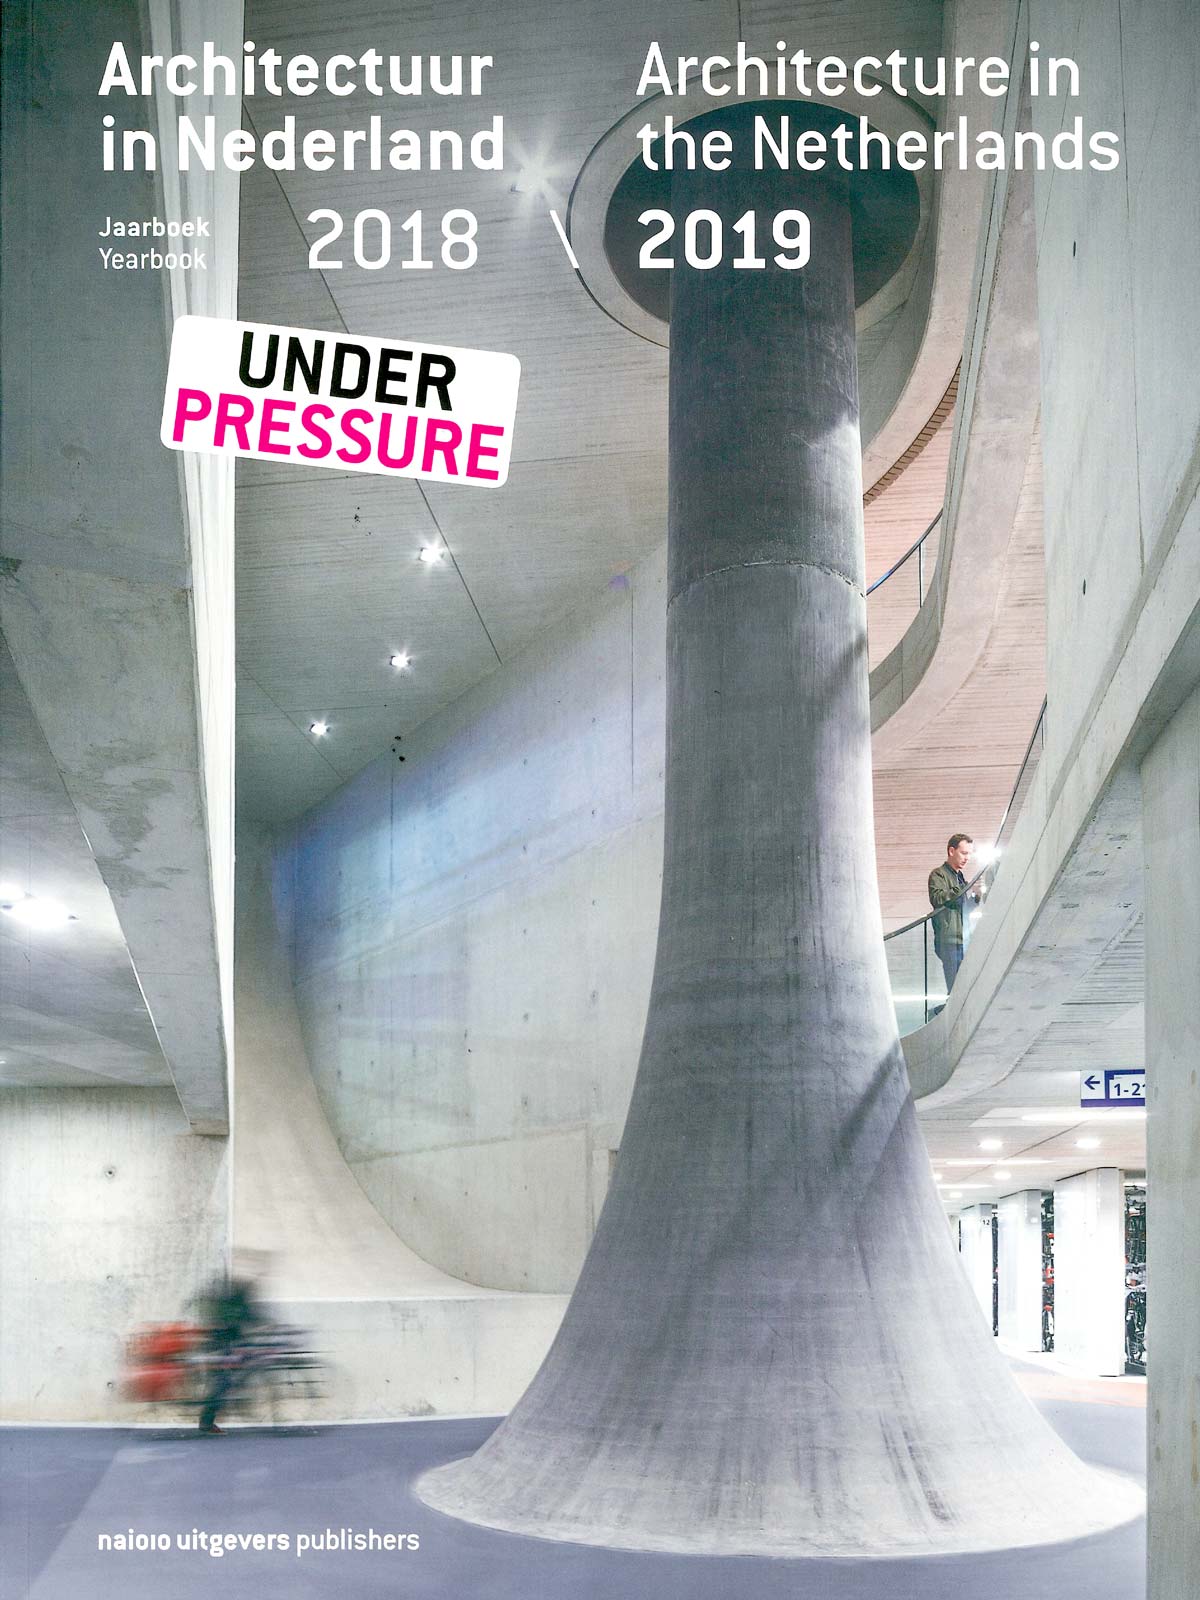 BETA’s work features in the Dutch Architecture Yearbook 2019